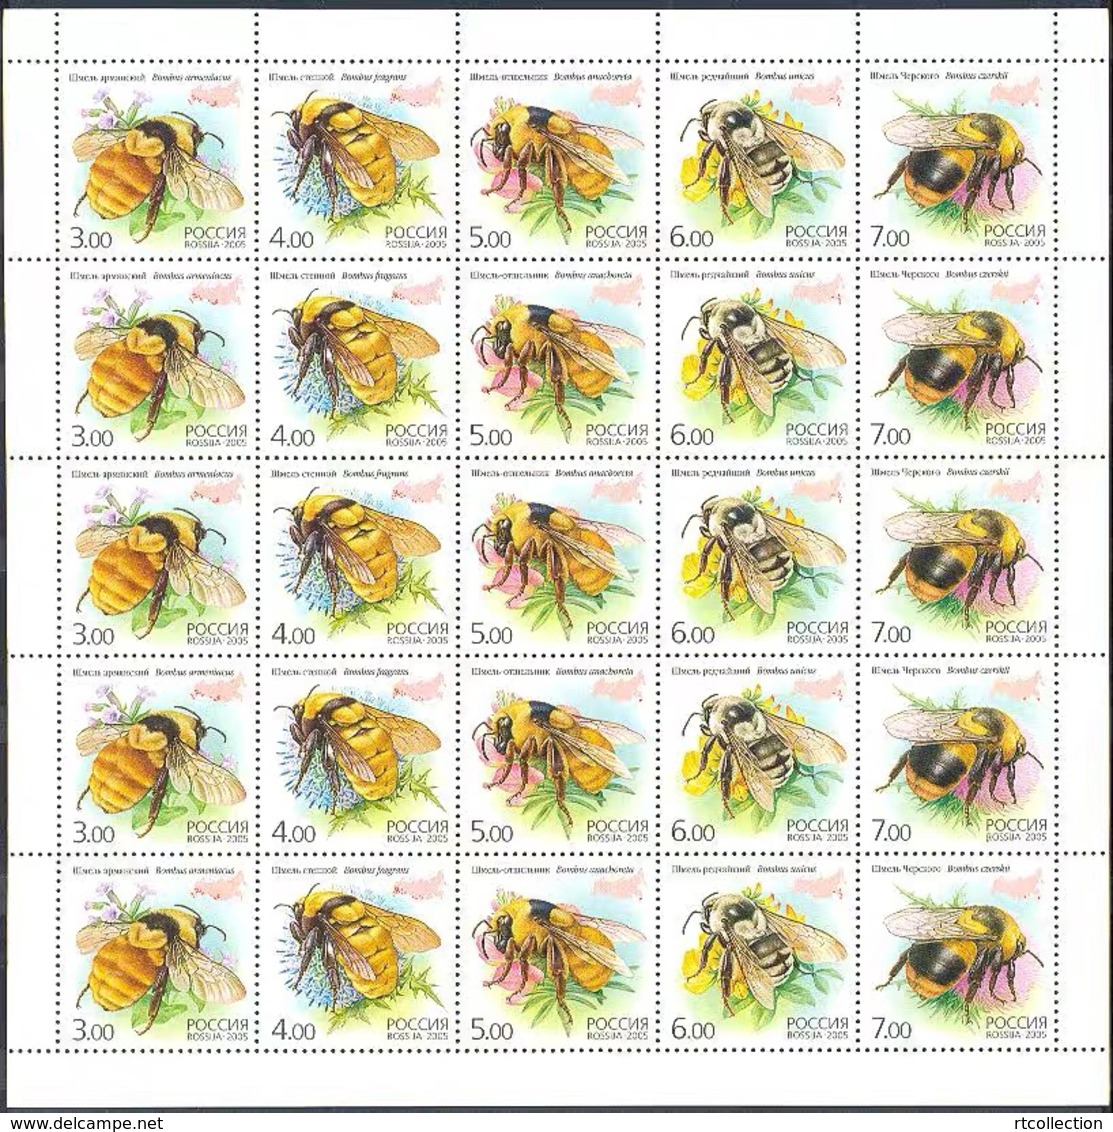 Russia 2005 One Sheet Of Insects Bumblebees Bee Insect Flowers Fauna Animals Nature Bombus Stamps Mi BL81 Sc 6912f - Hojas Completas